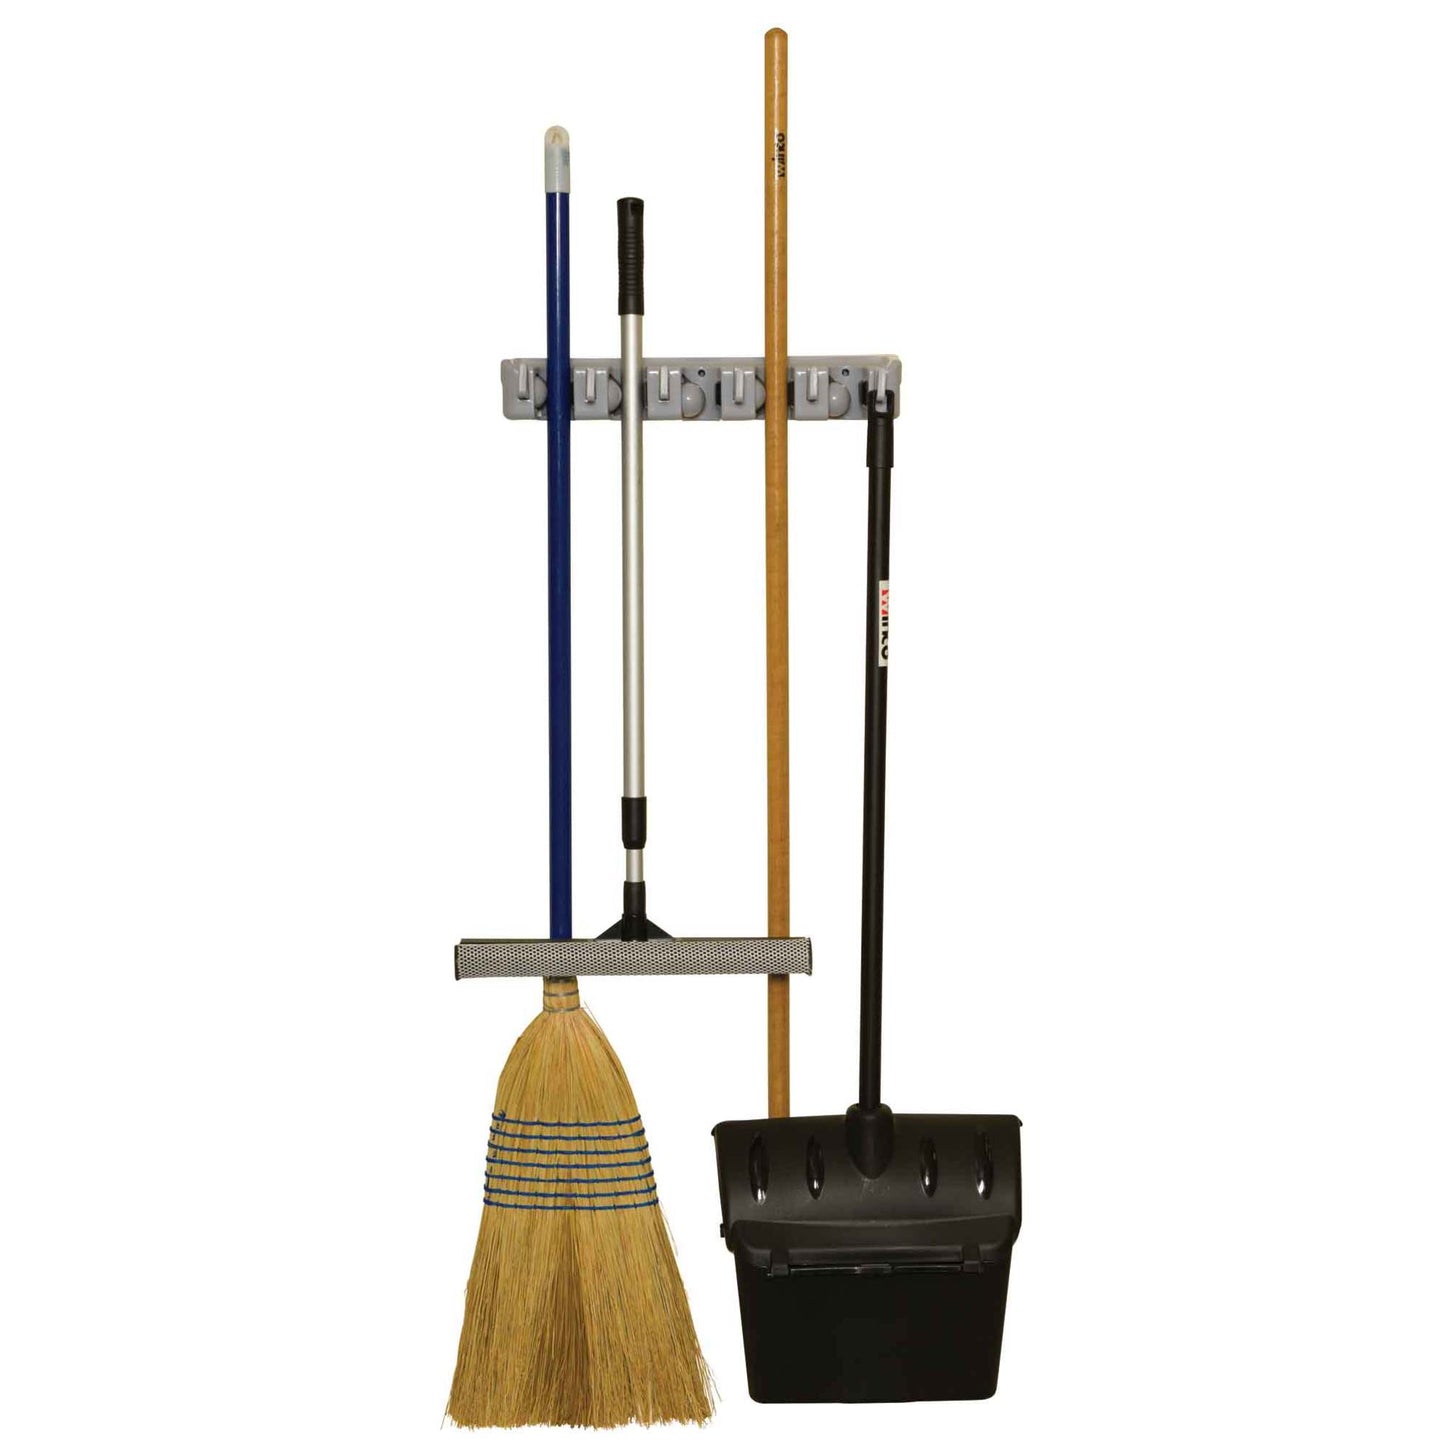 16" Mop/Broom Rack with 5 Clips and 6 Hooks